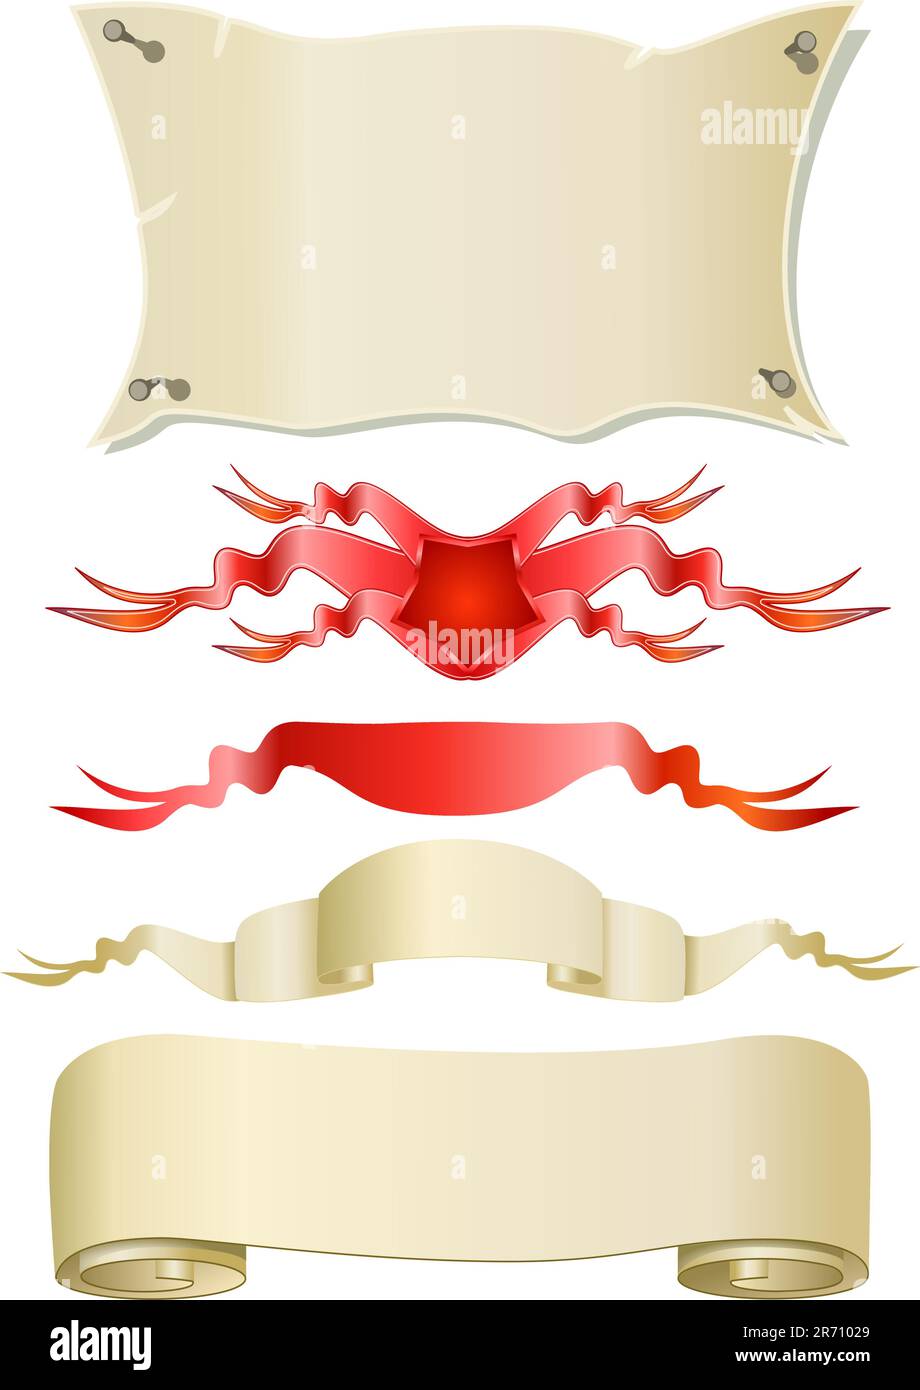 red scroll banner